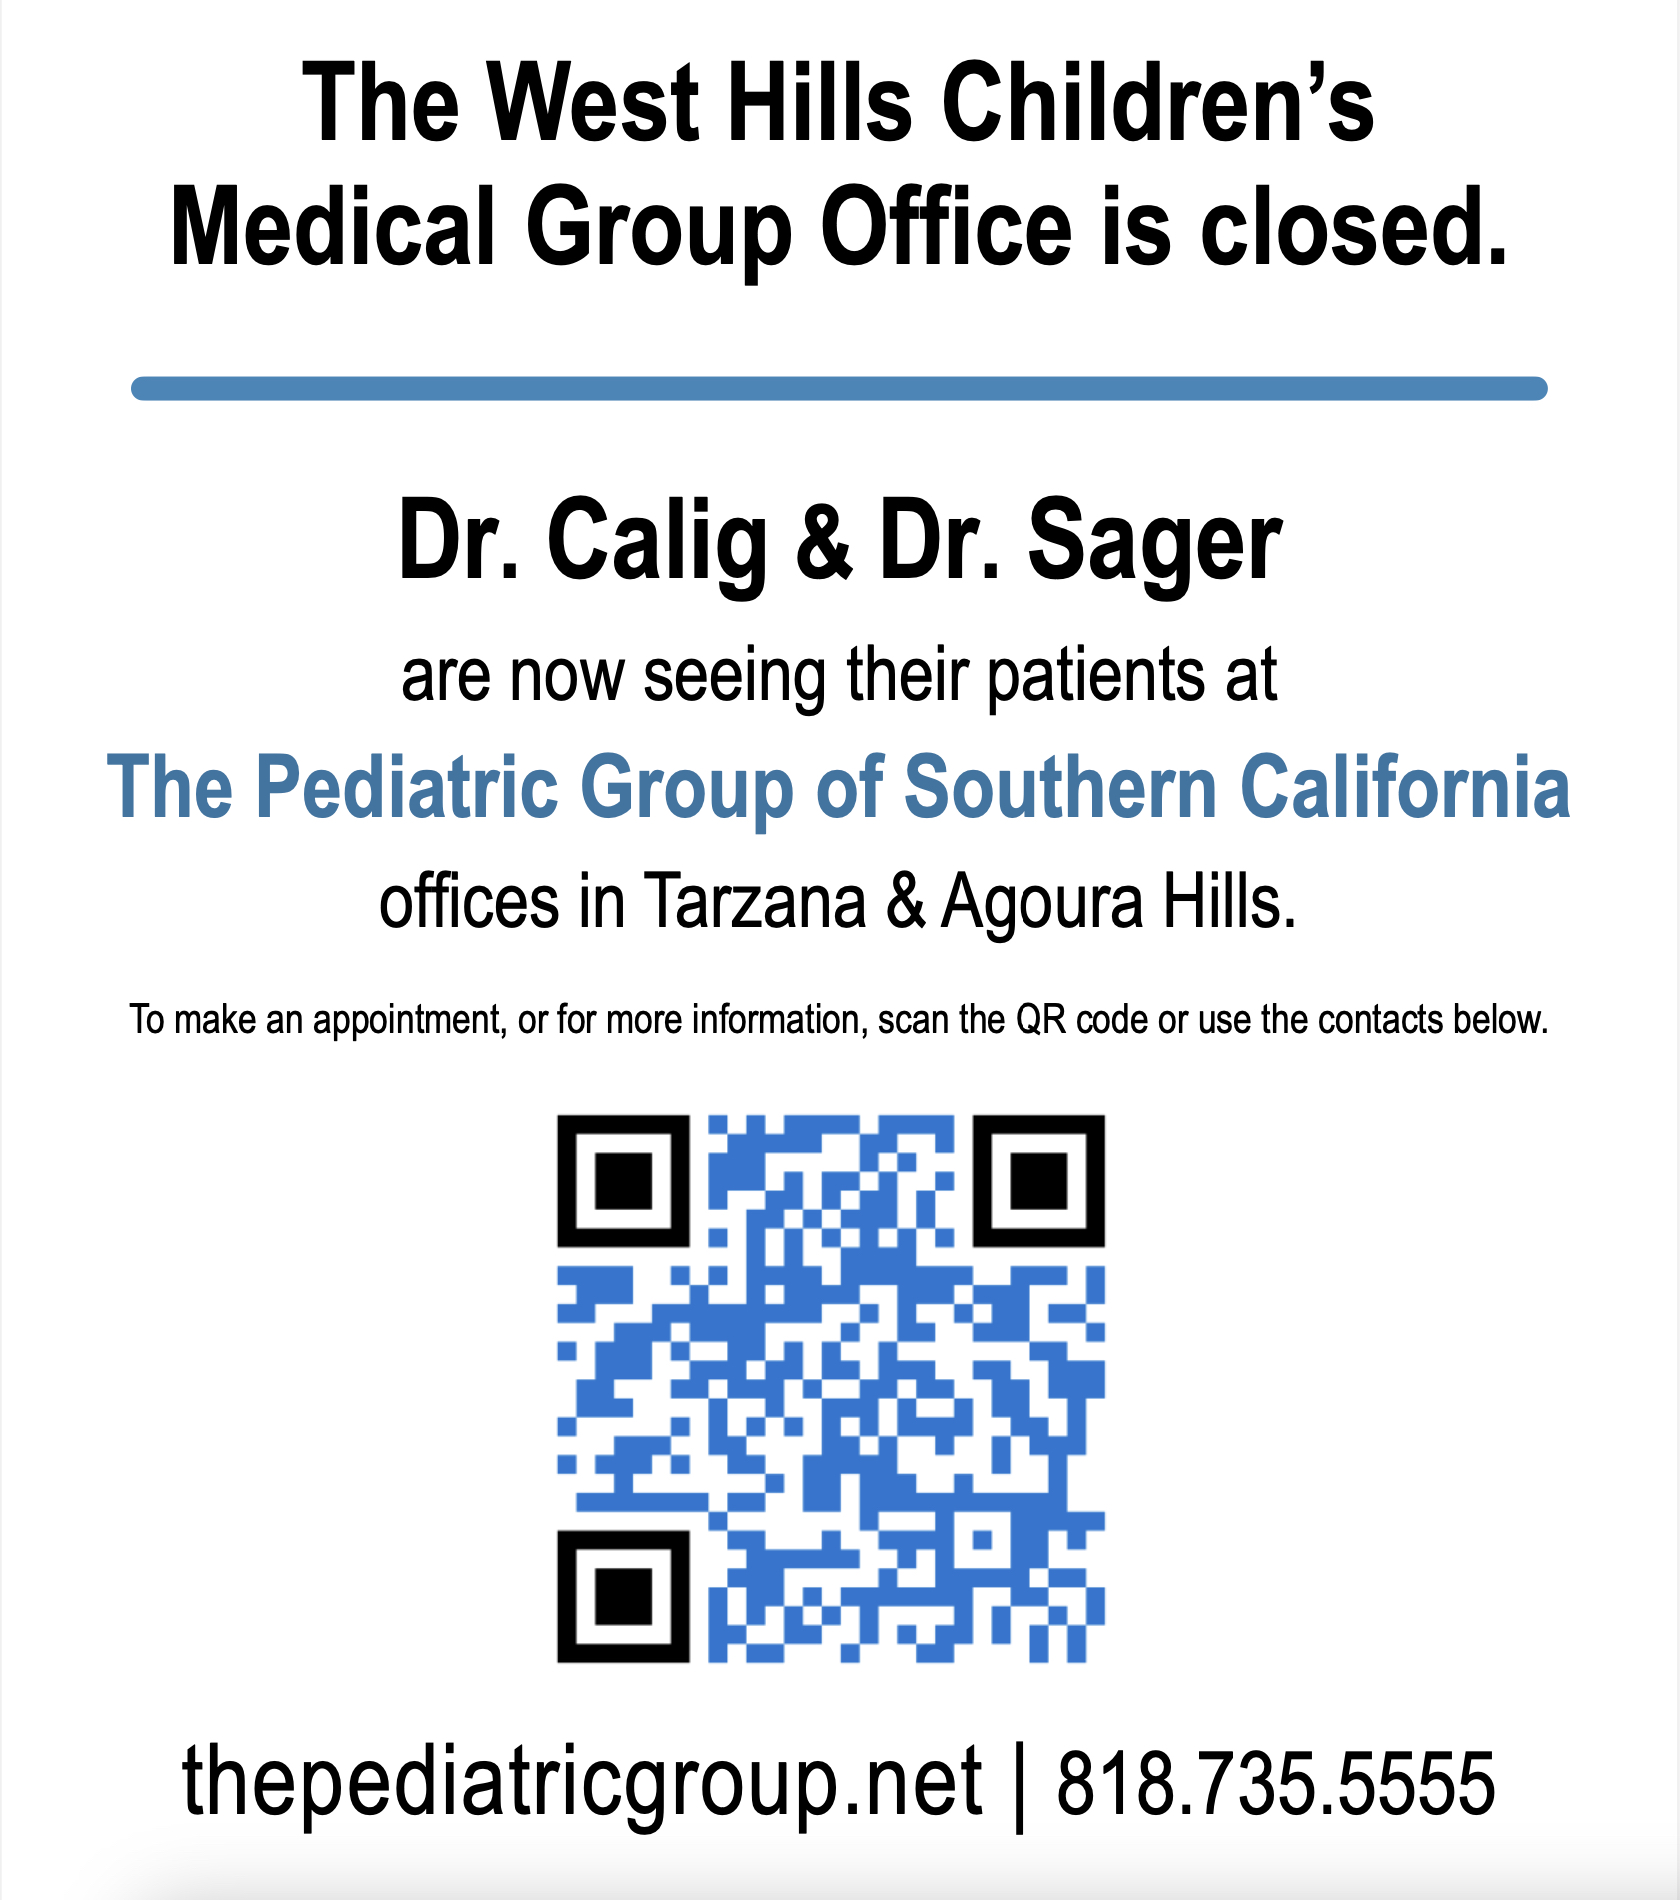 West Hills Children's Medical Group Office is Closed. Please visit https://thepediatricgroup.net/